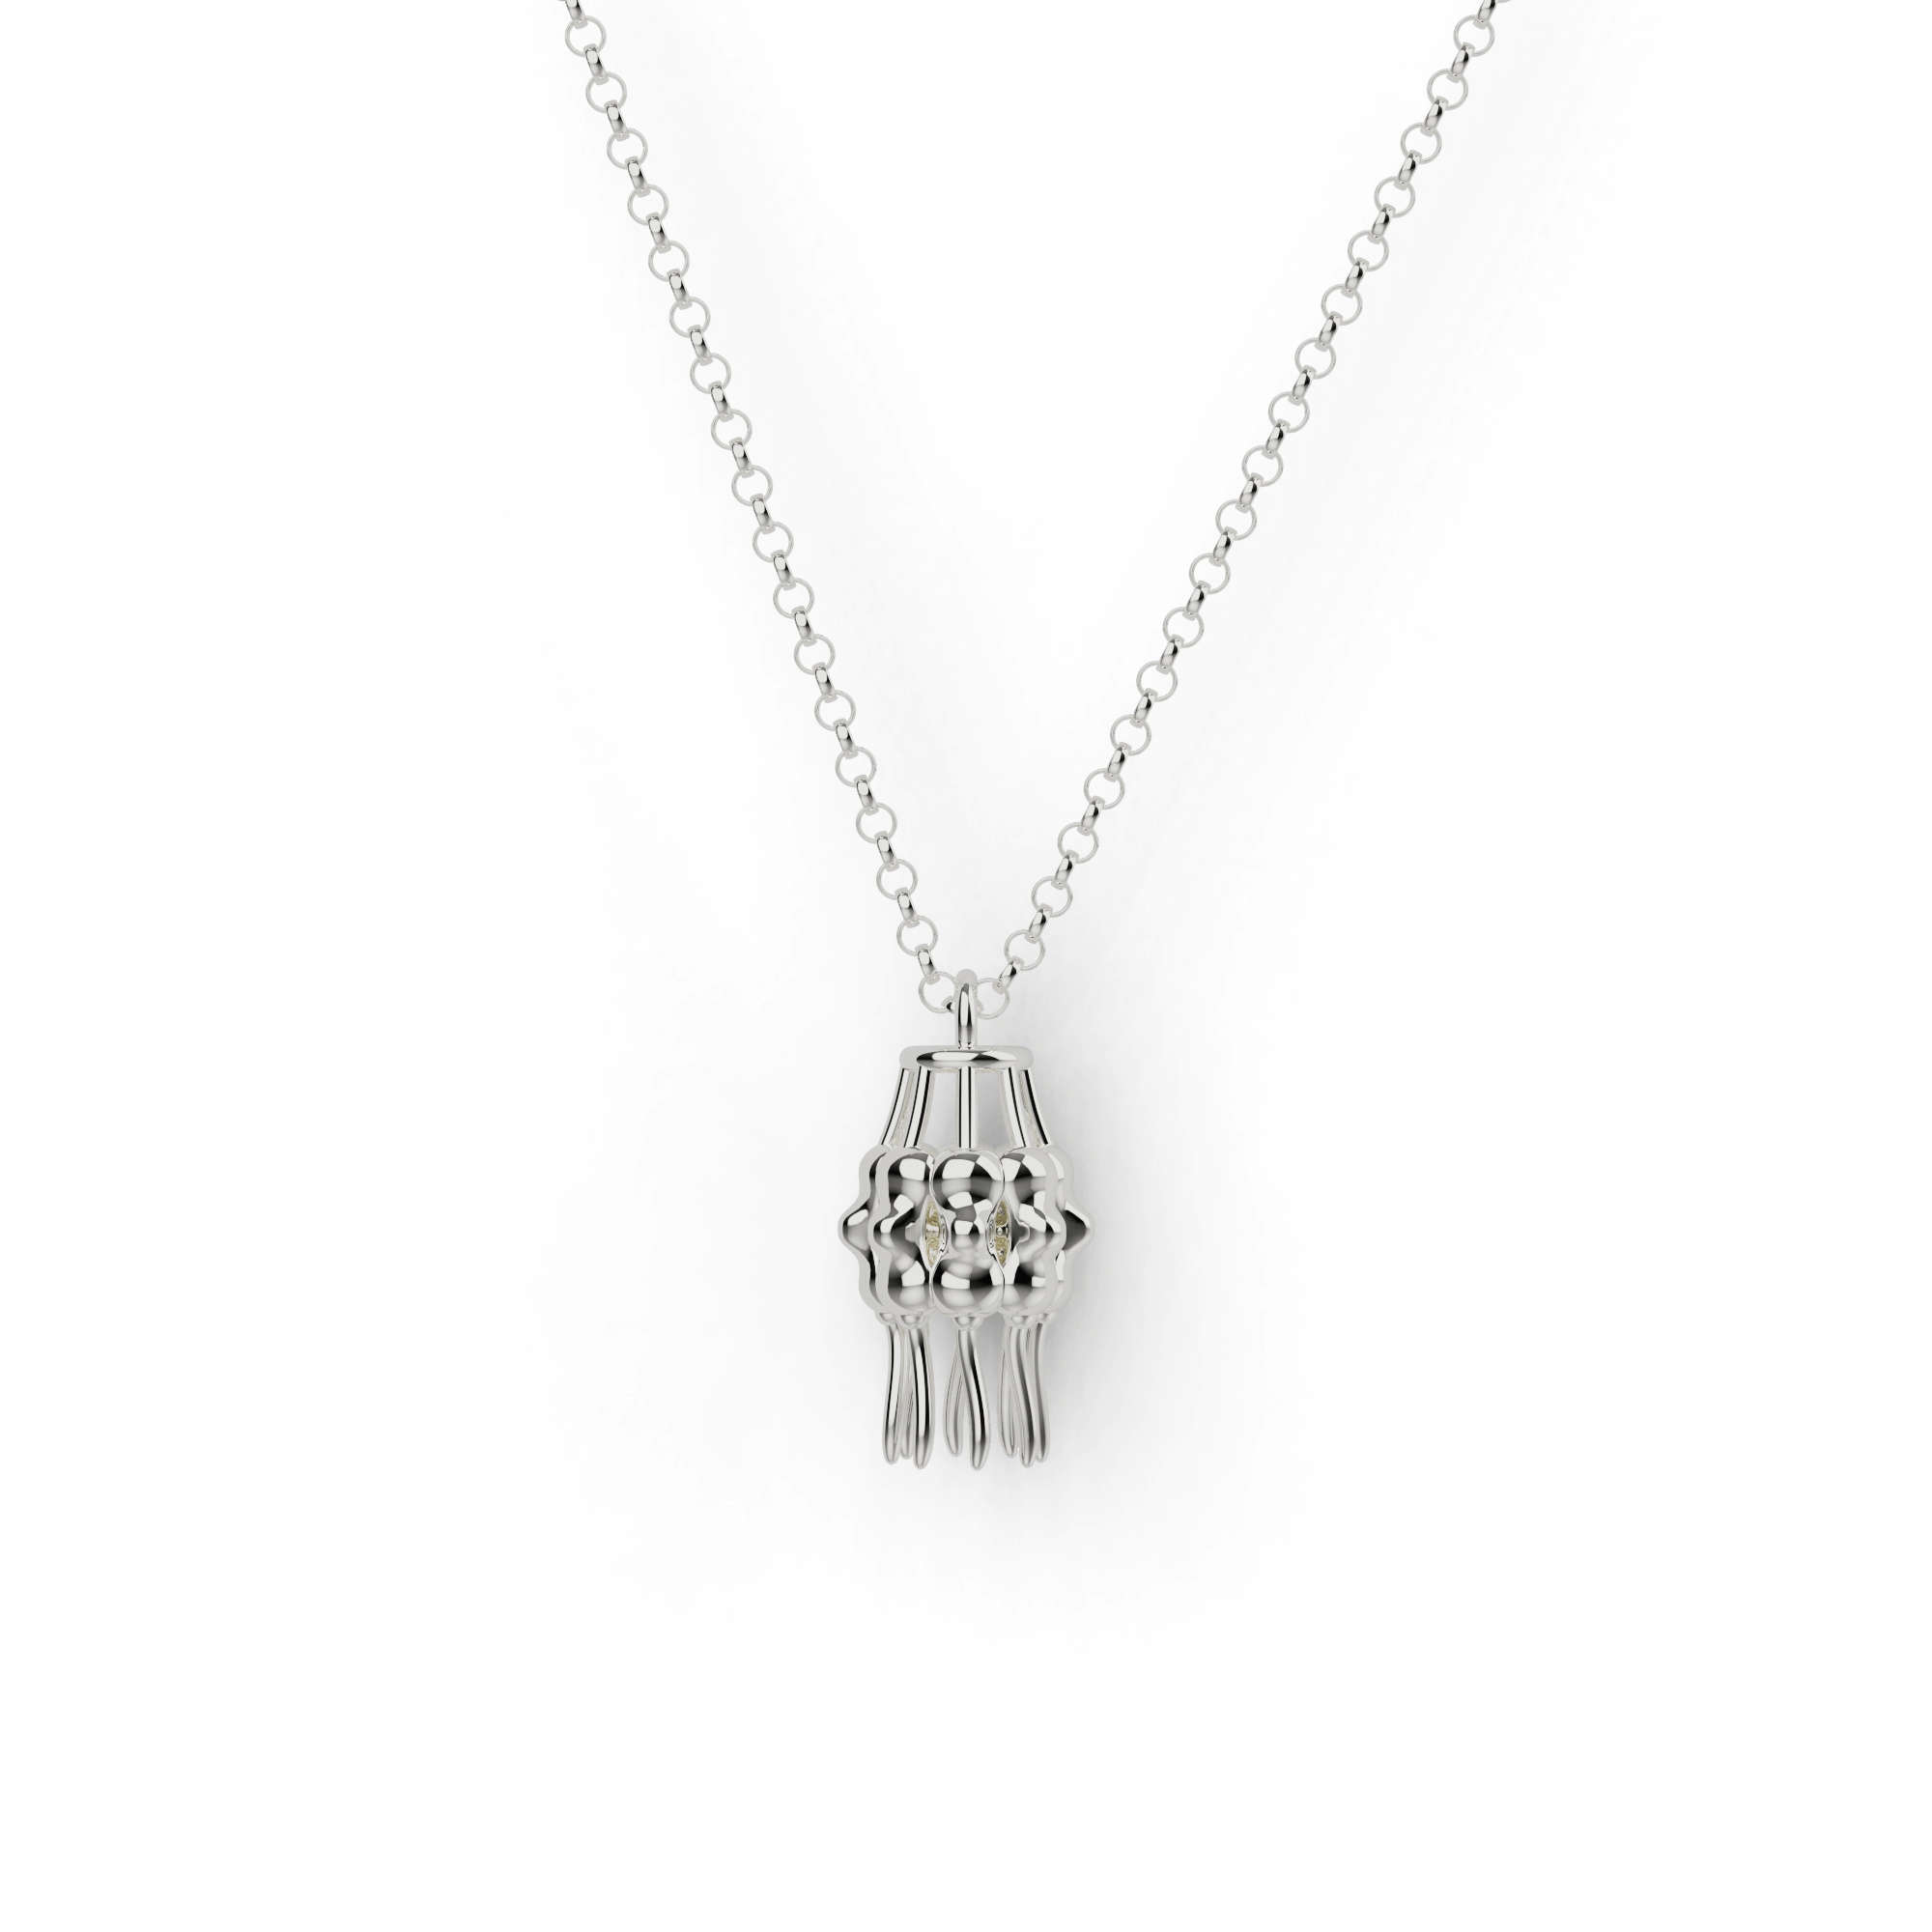 nuclear pore necklace | silver